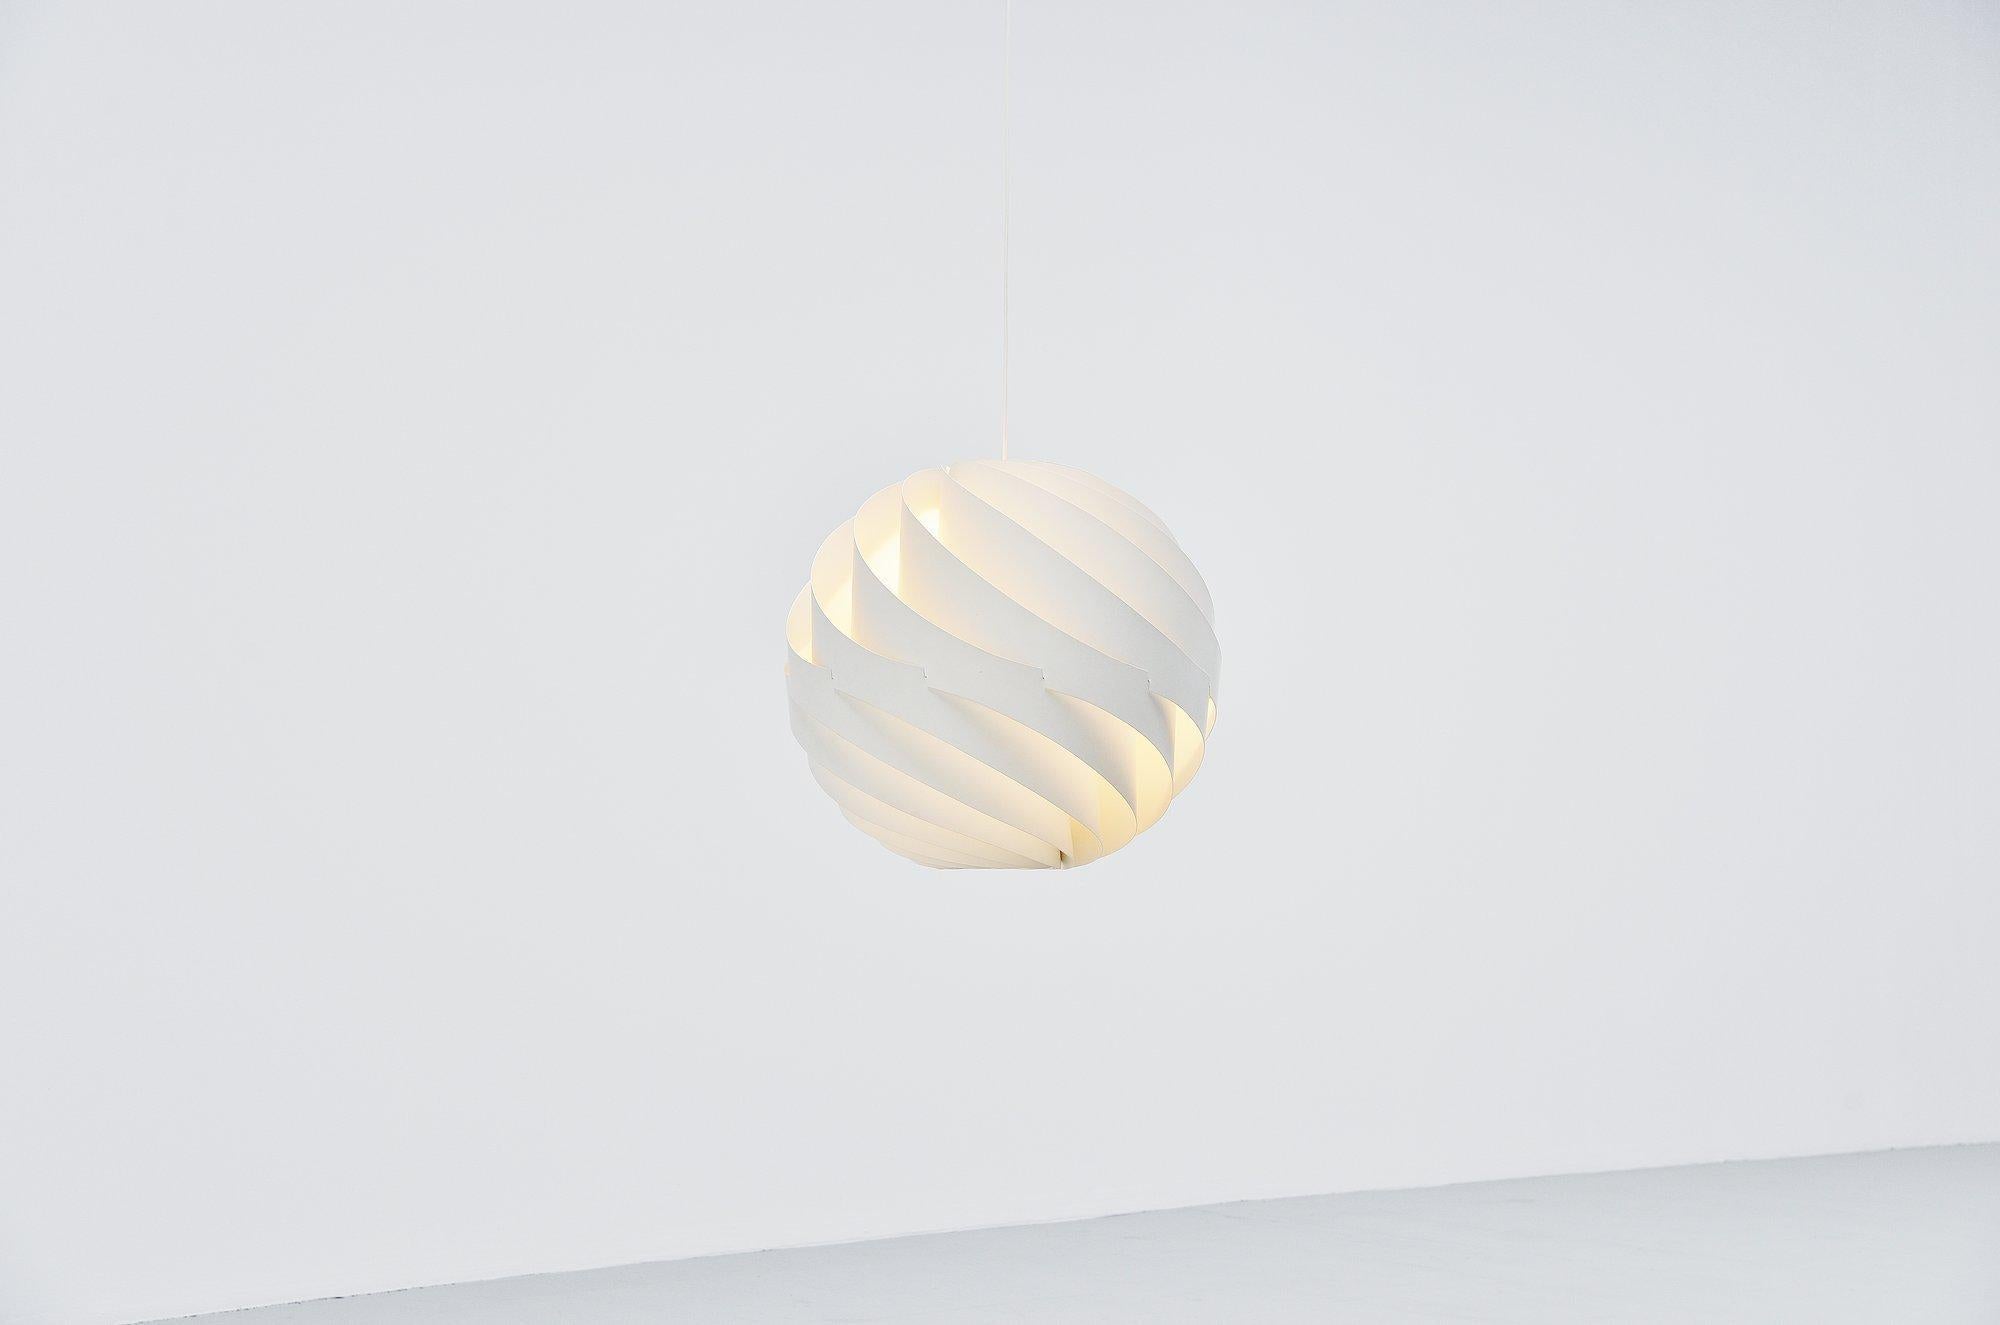 Fantastic large pendant lamp called Turbo designed by Louis Weisdorf and manufactured by Lyfa, Denmark 1965. This super shaped large pendant lamp is made of aluminium layers rotated into a turbo. Gives very nice warm light when lit, super spherical